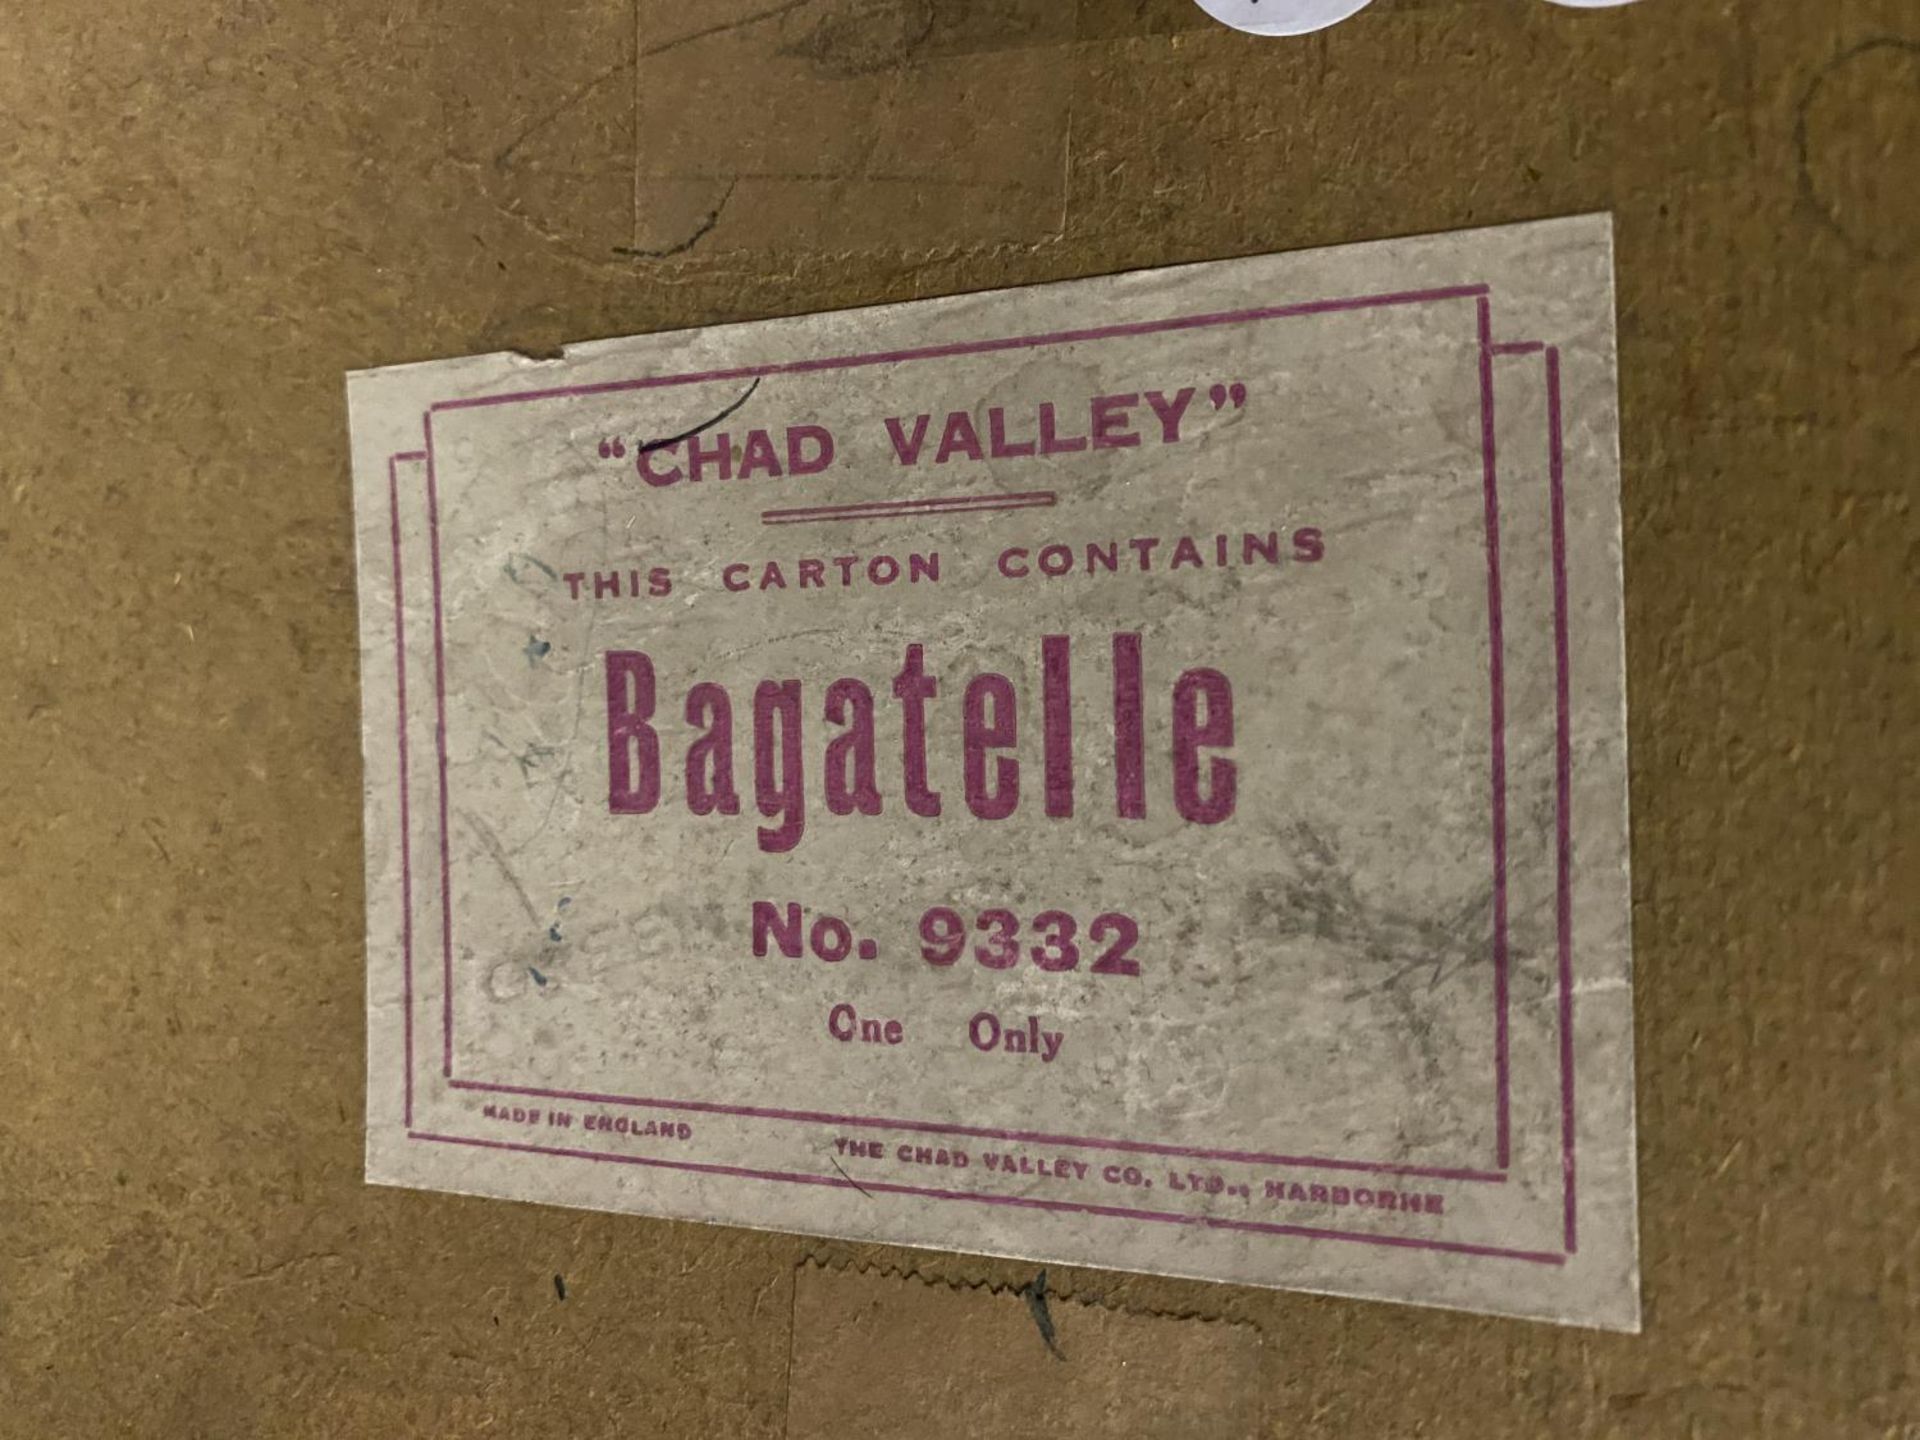 A VINTAGE CHAD VALLEY BOXED BAGATELLE GAME - Image 2 of 2